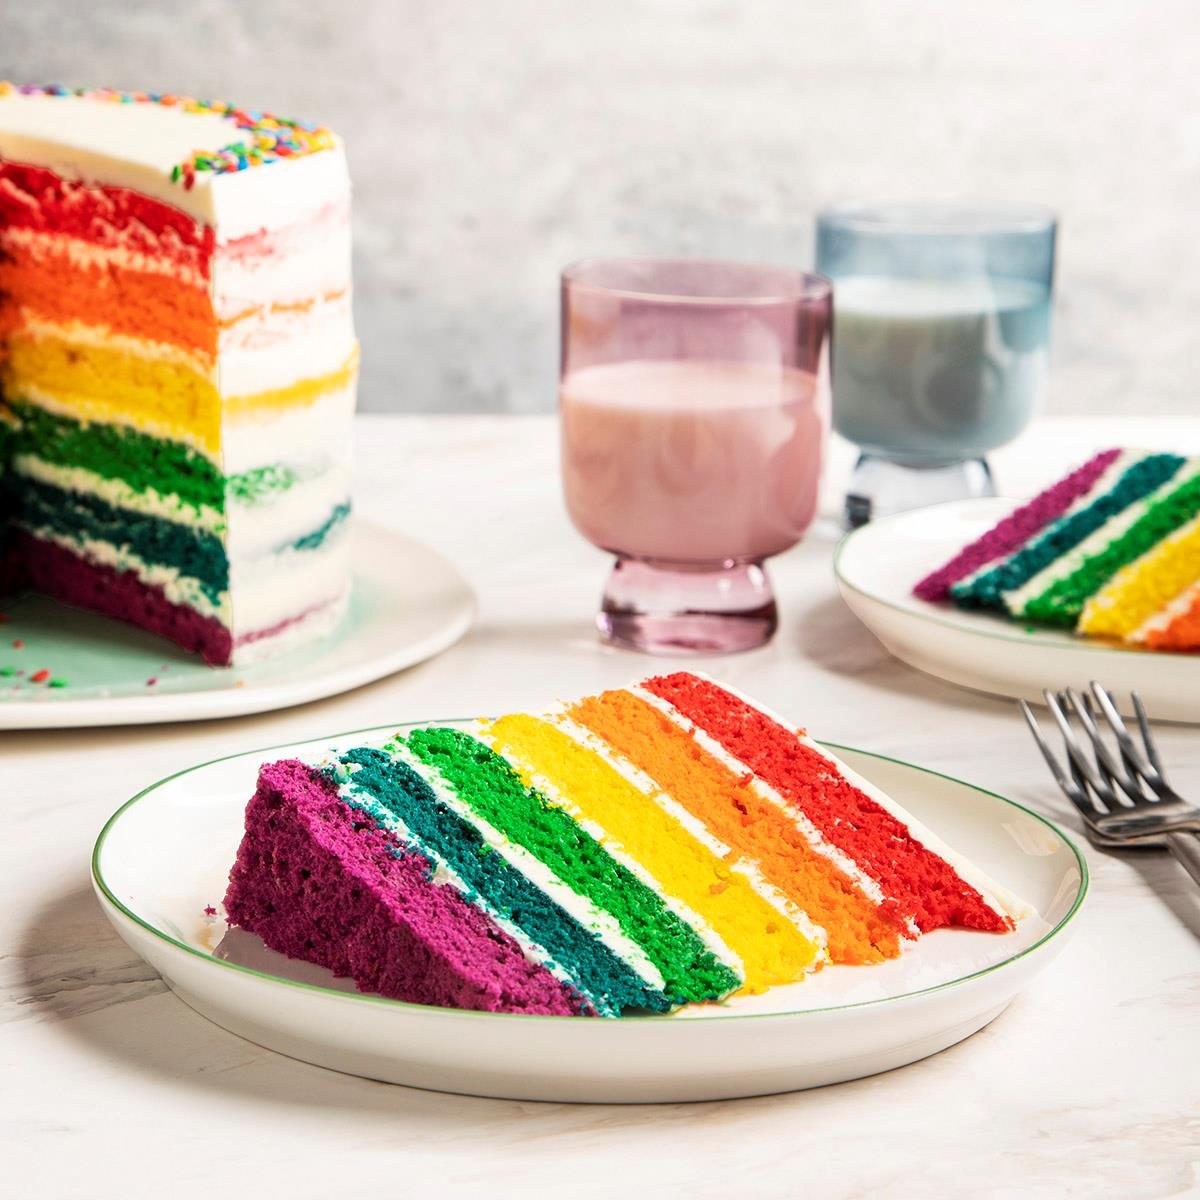 Rainbow cake for kids | Easy recipe | Cooking with my kids